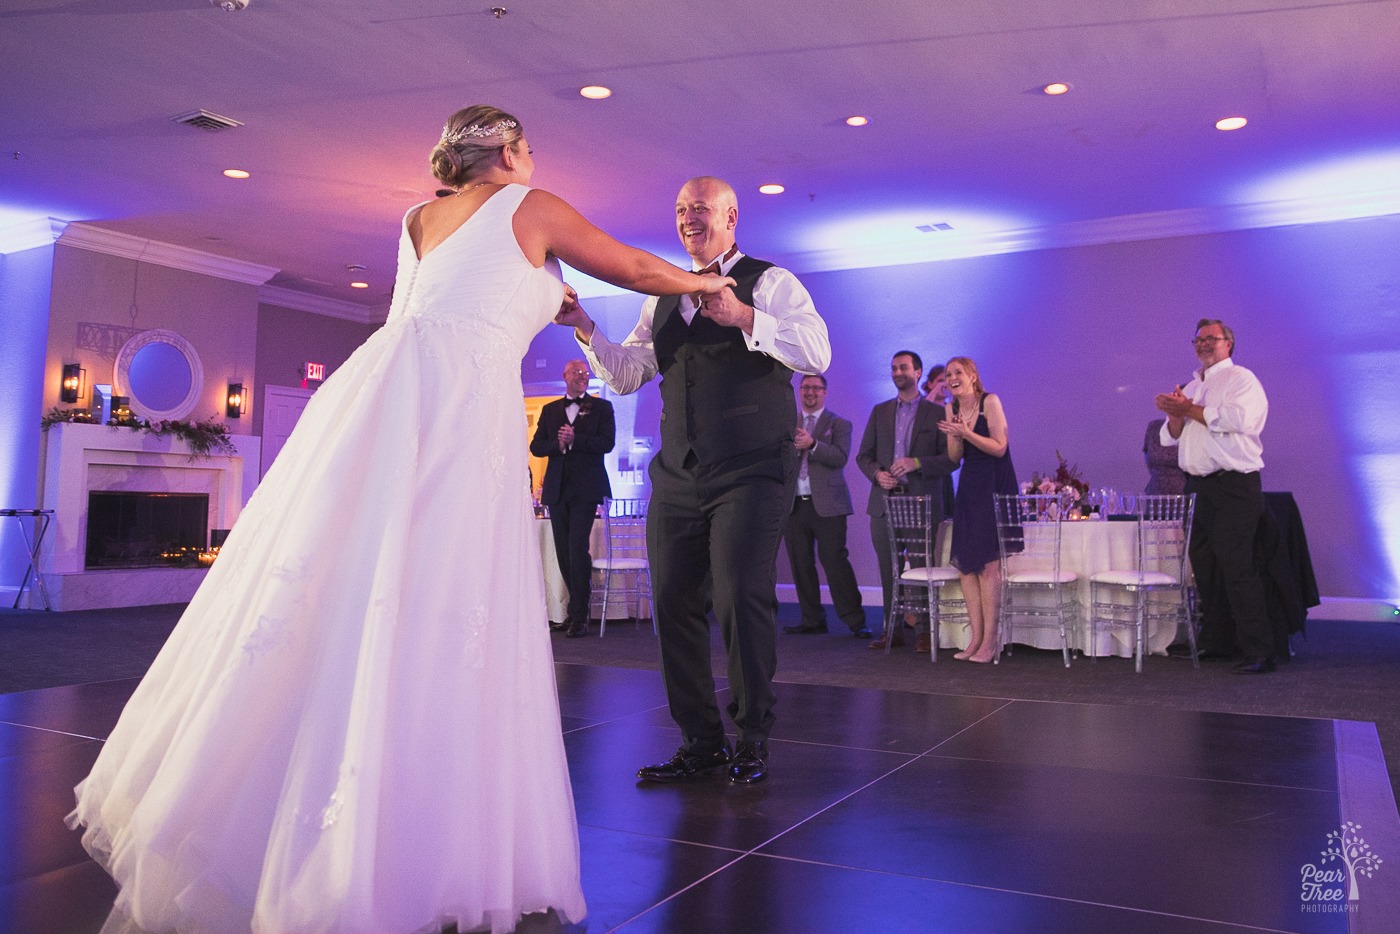 Bride and groom dancing while friends clap and cheer